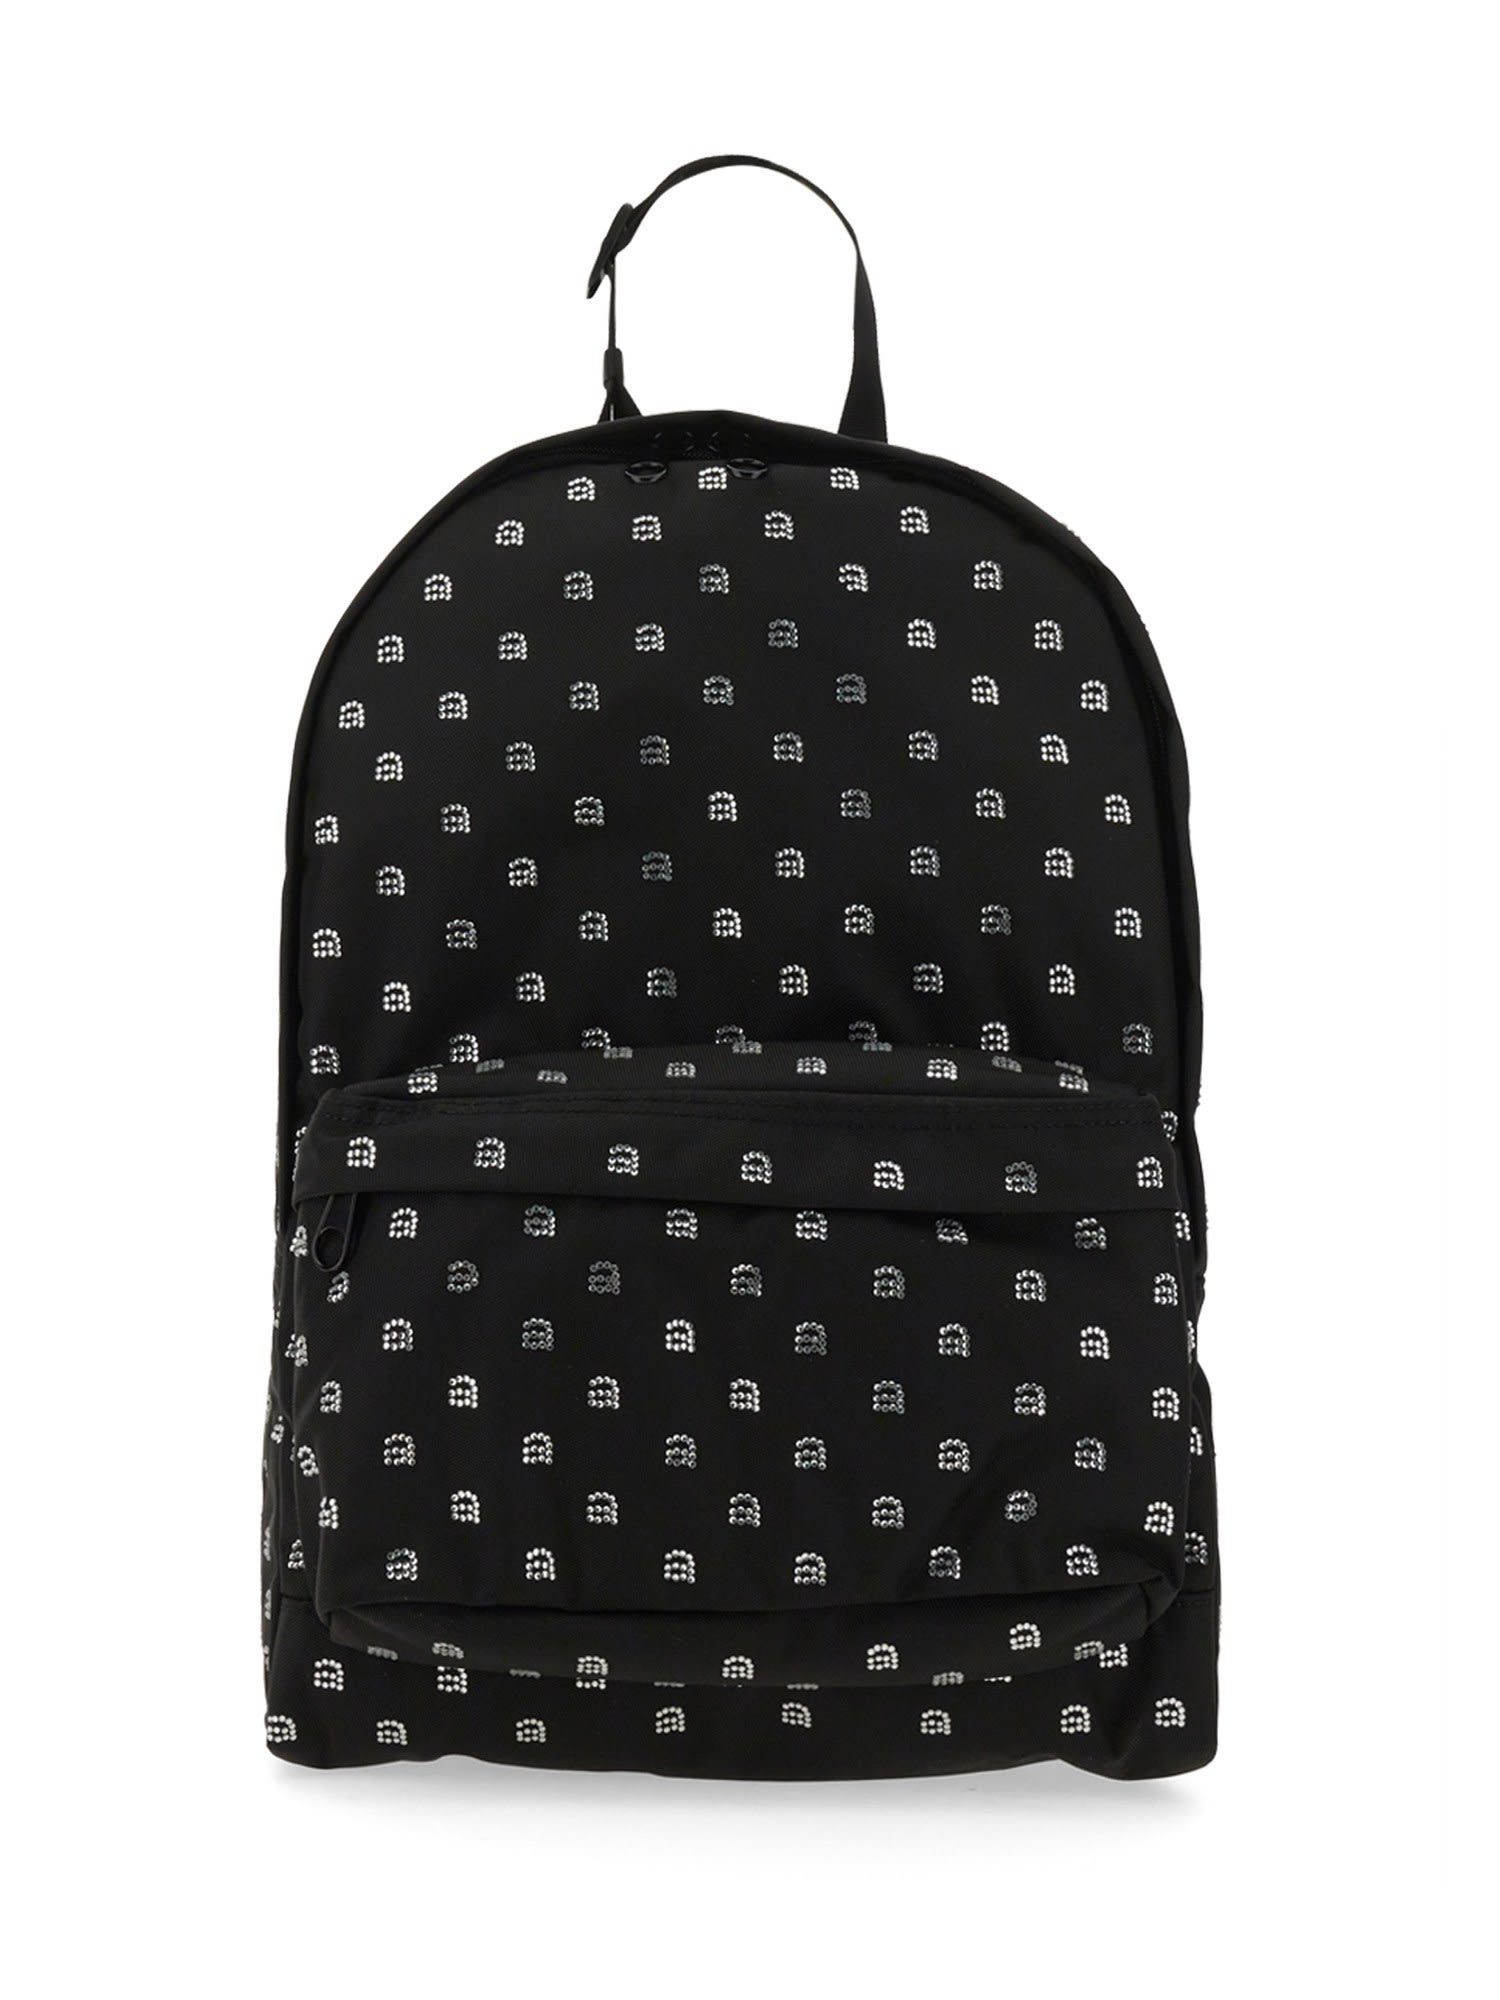 ALEXANDER WANG BACKPACK WITH ALL-OVER LOGO IN CRYSTALS